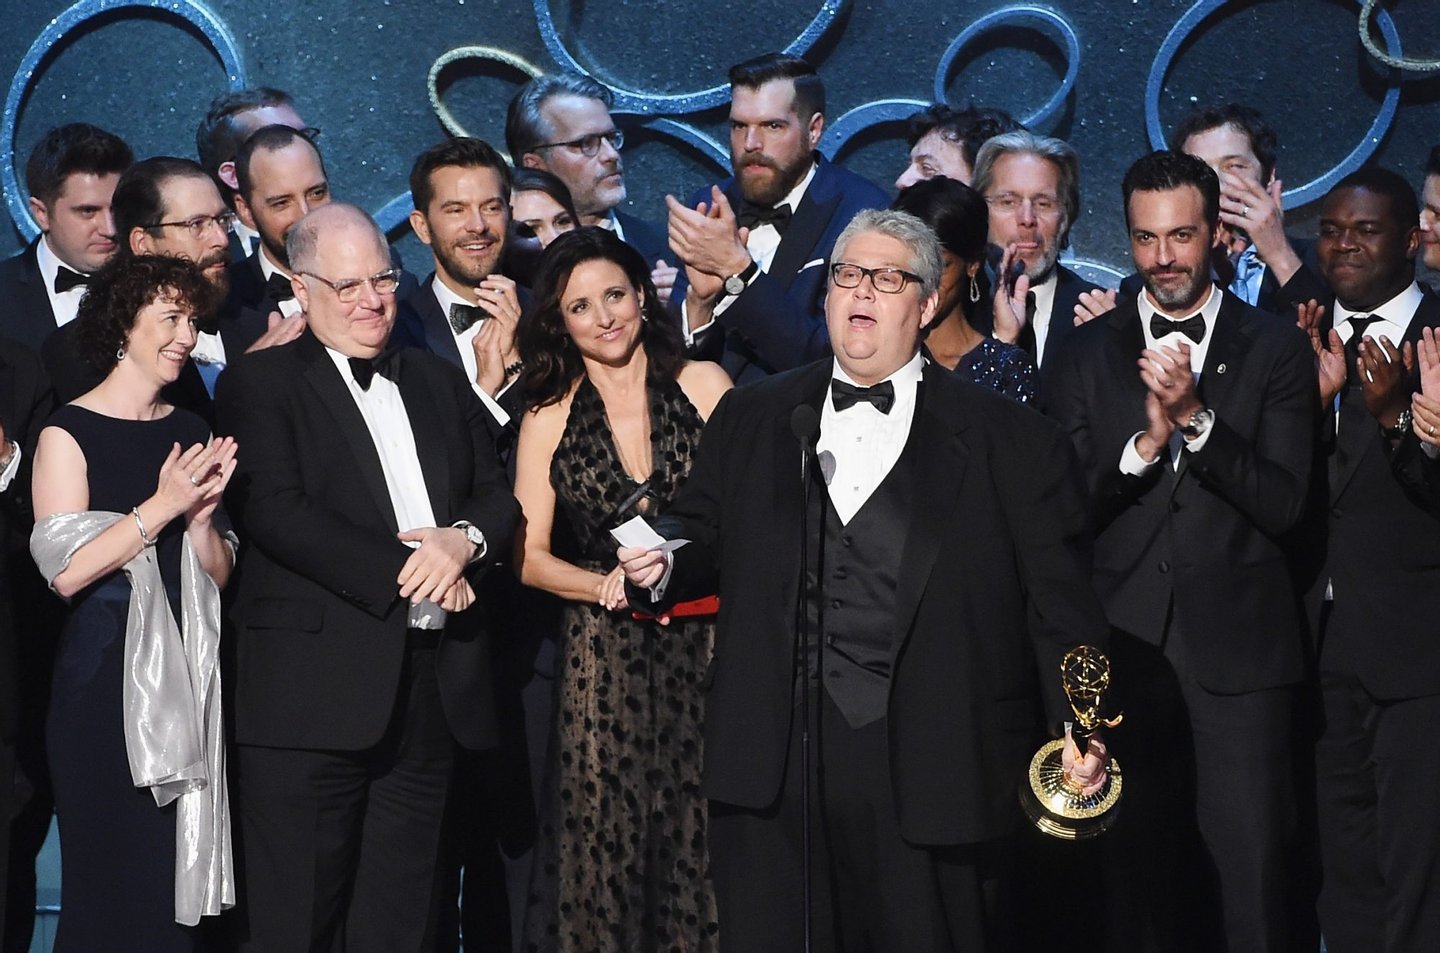 LOS ANGELES, CA - SEPTEMBER 18: Actress Julia Louis-Dreyfus, producer David Mandel (both center) and production team accept Outstanding Comedy Series for 'Veep' onstage during the 68th Annual Primetime Emmy Awards at Microsoft Theater on September 18, 2016 in Los Angeles, California. (Photo by Kevin Winter/Getty Images)